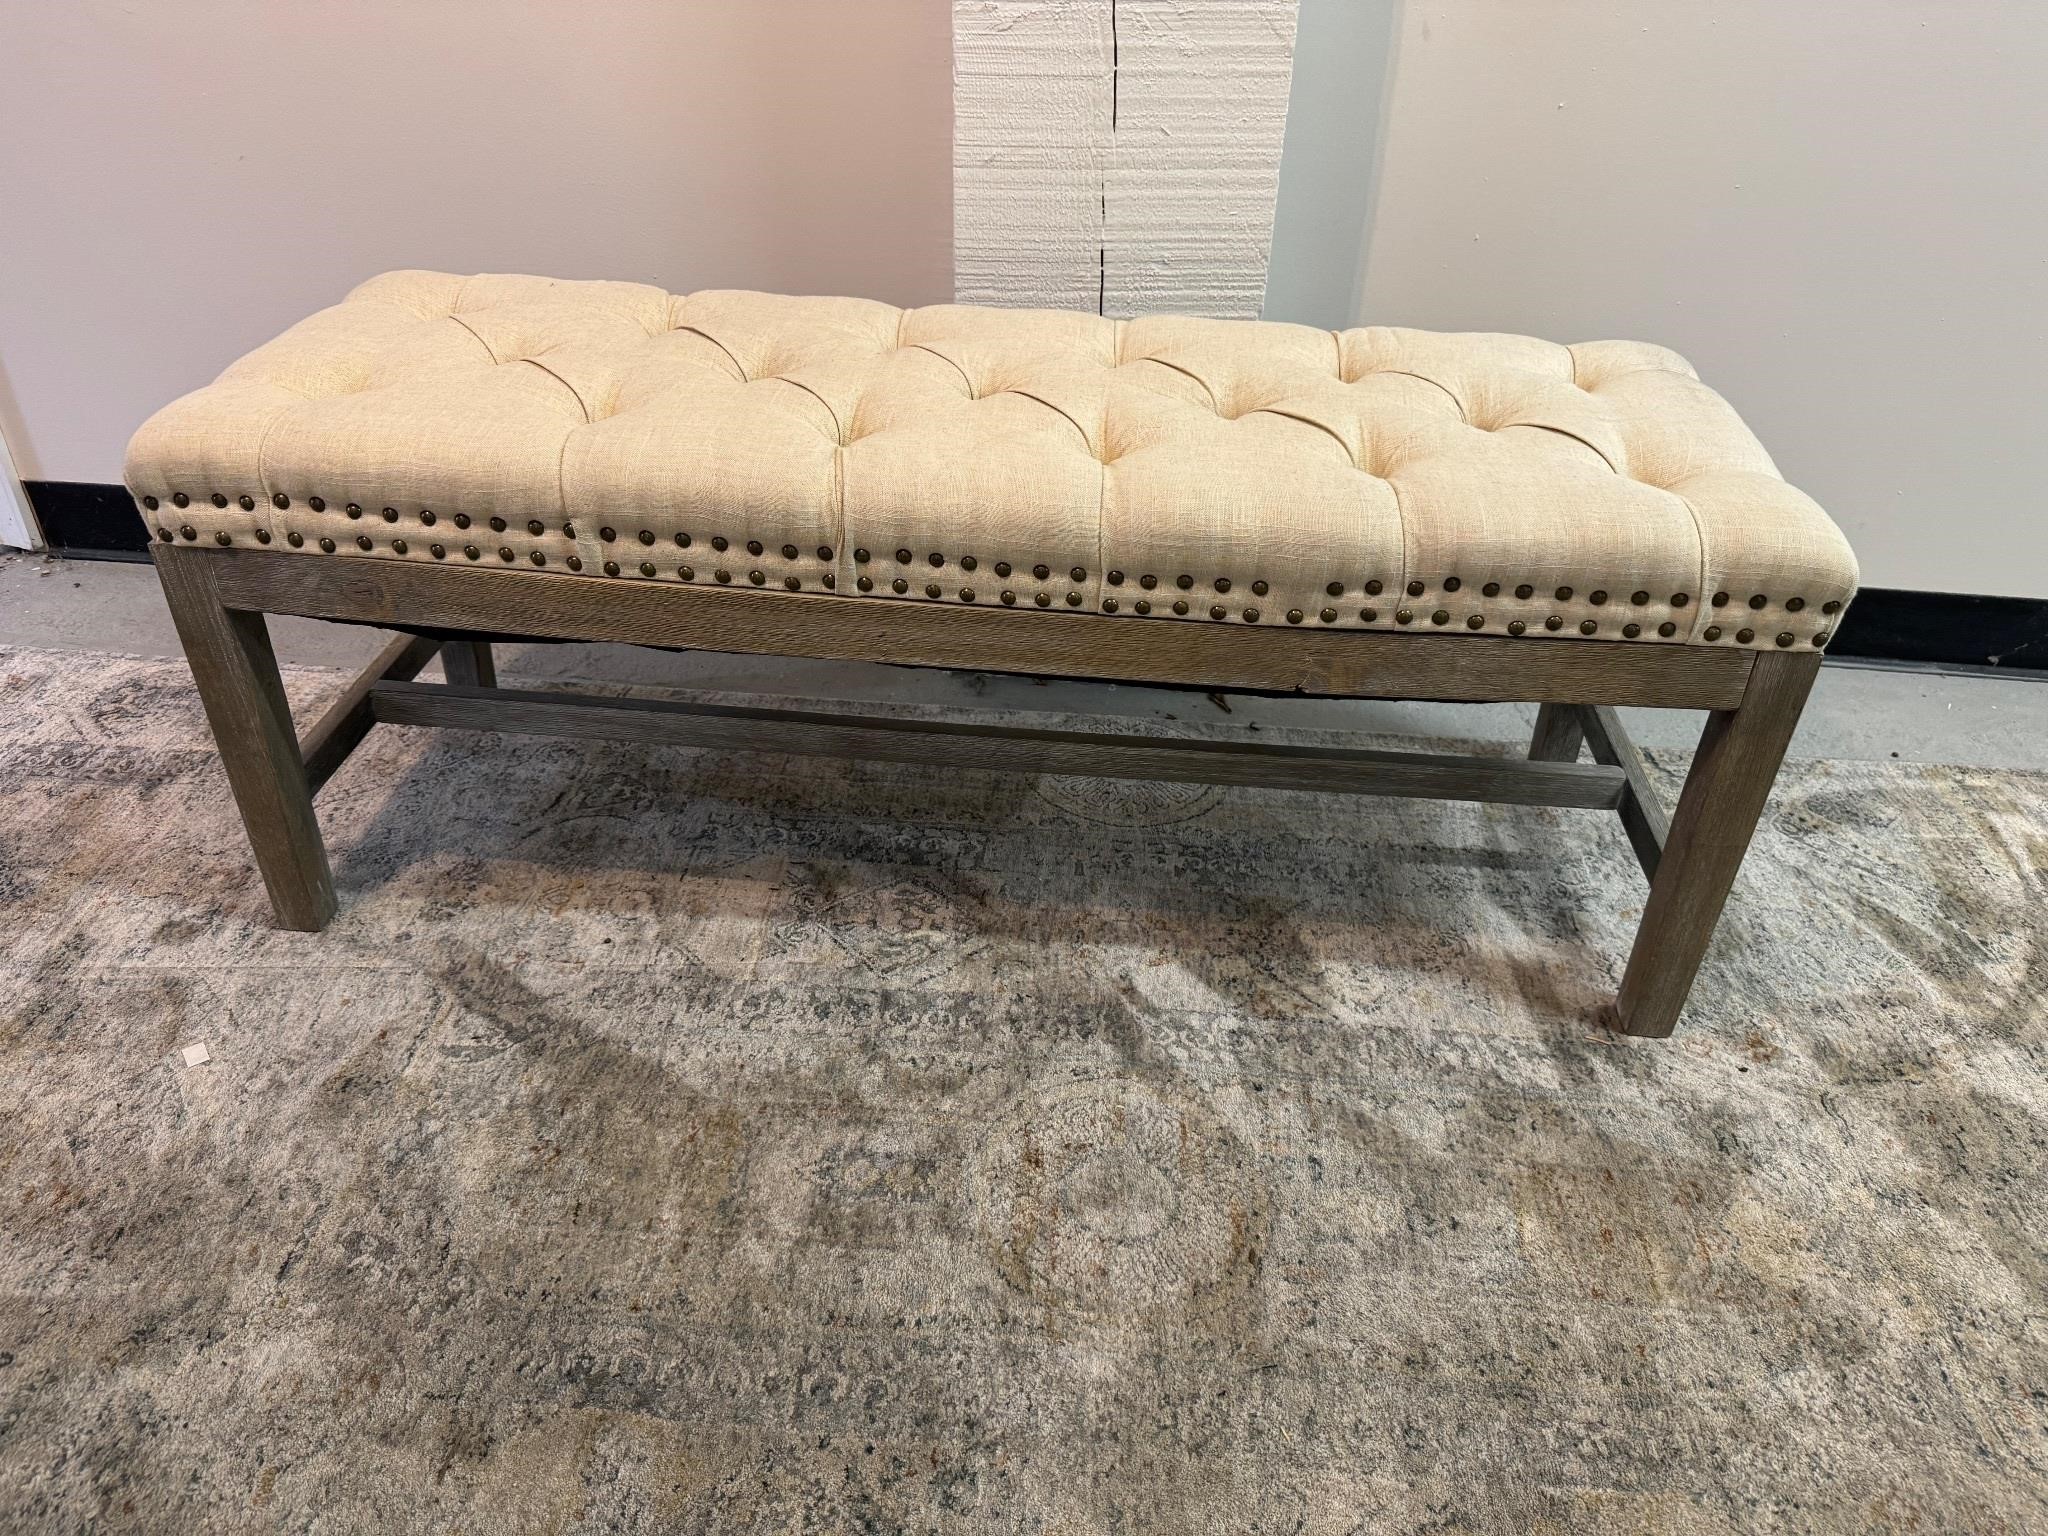 Tufted Upholstered & Wood Bench